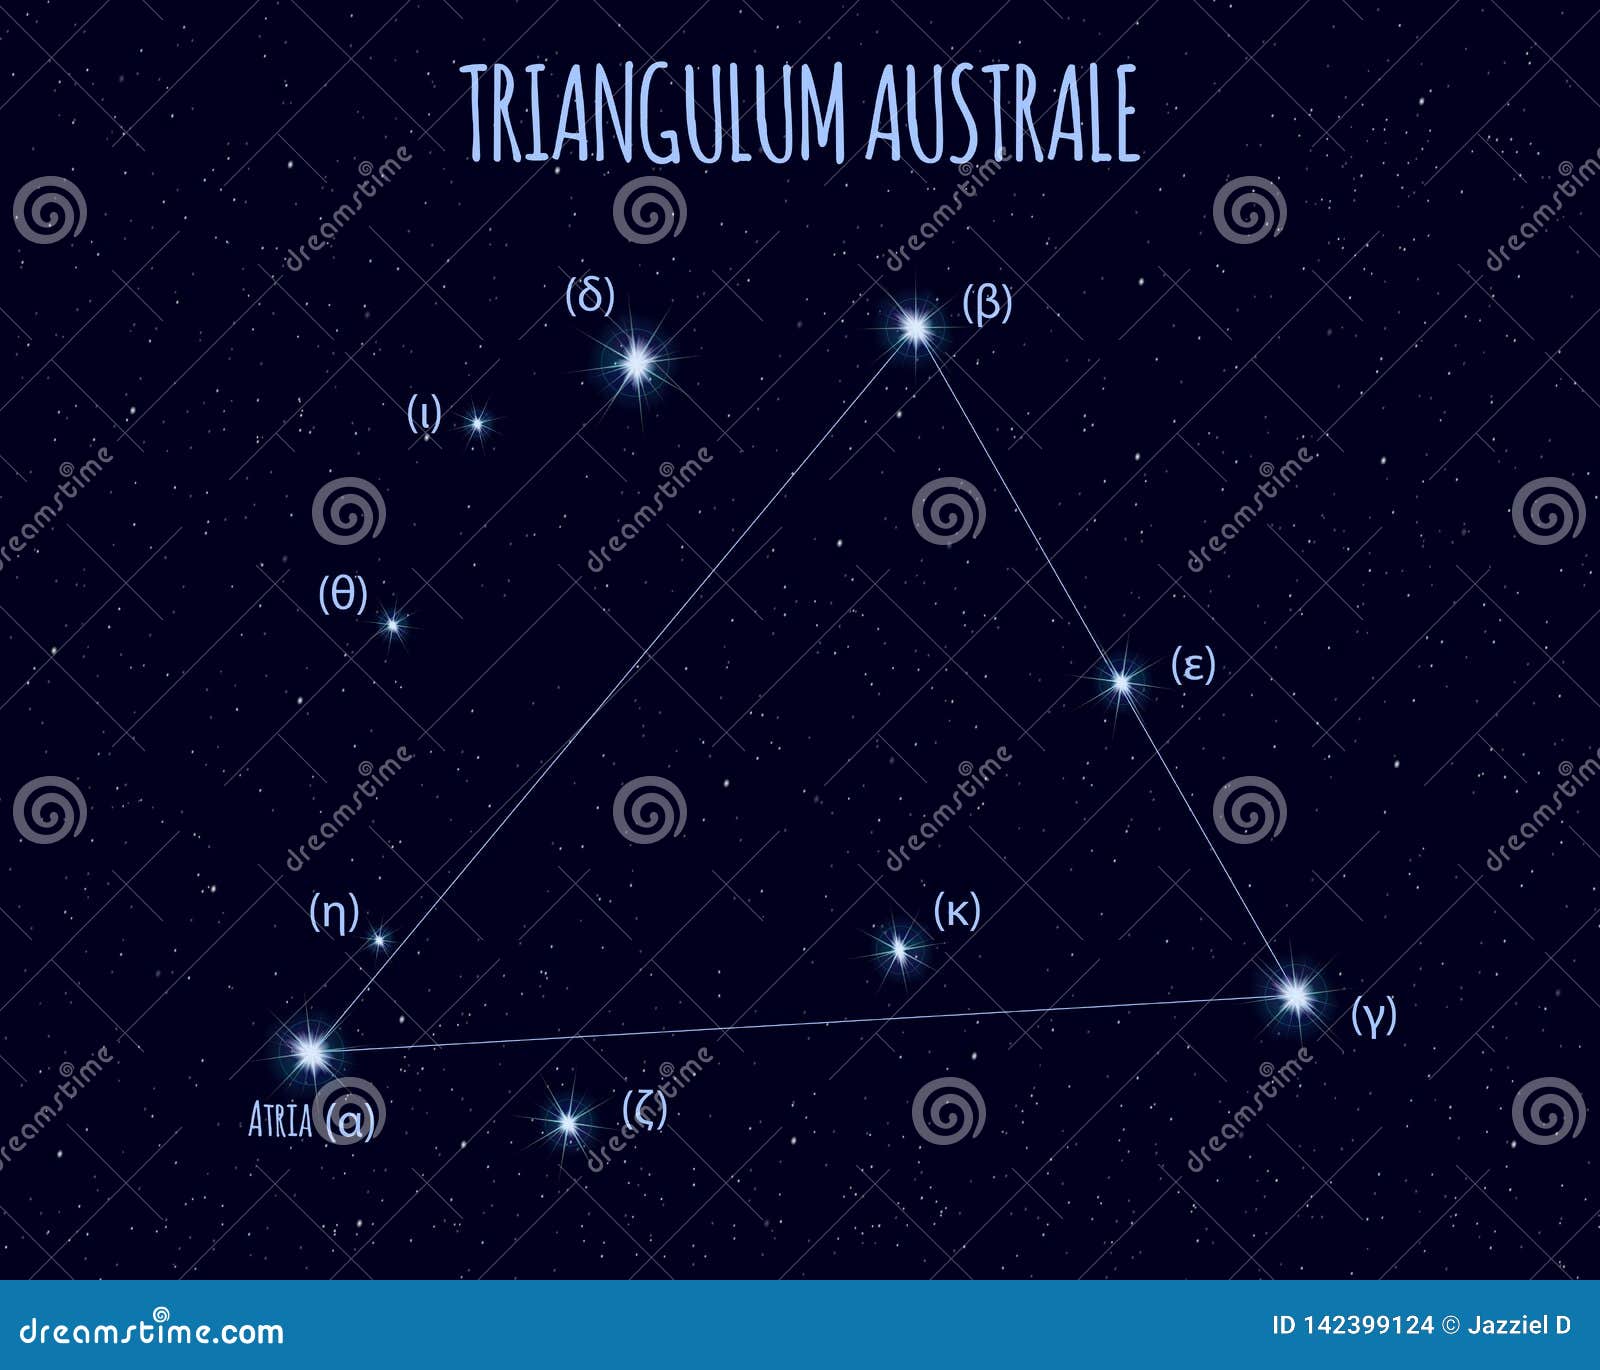 triangulum australe constellation,   with the names of basic stars